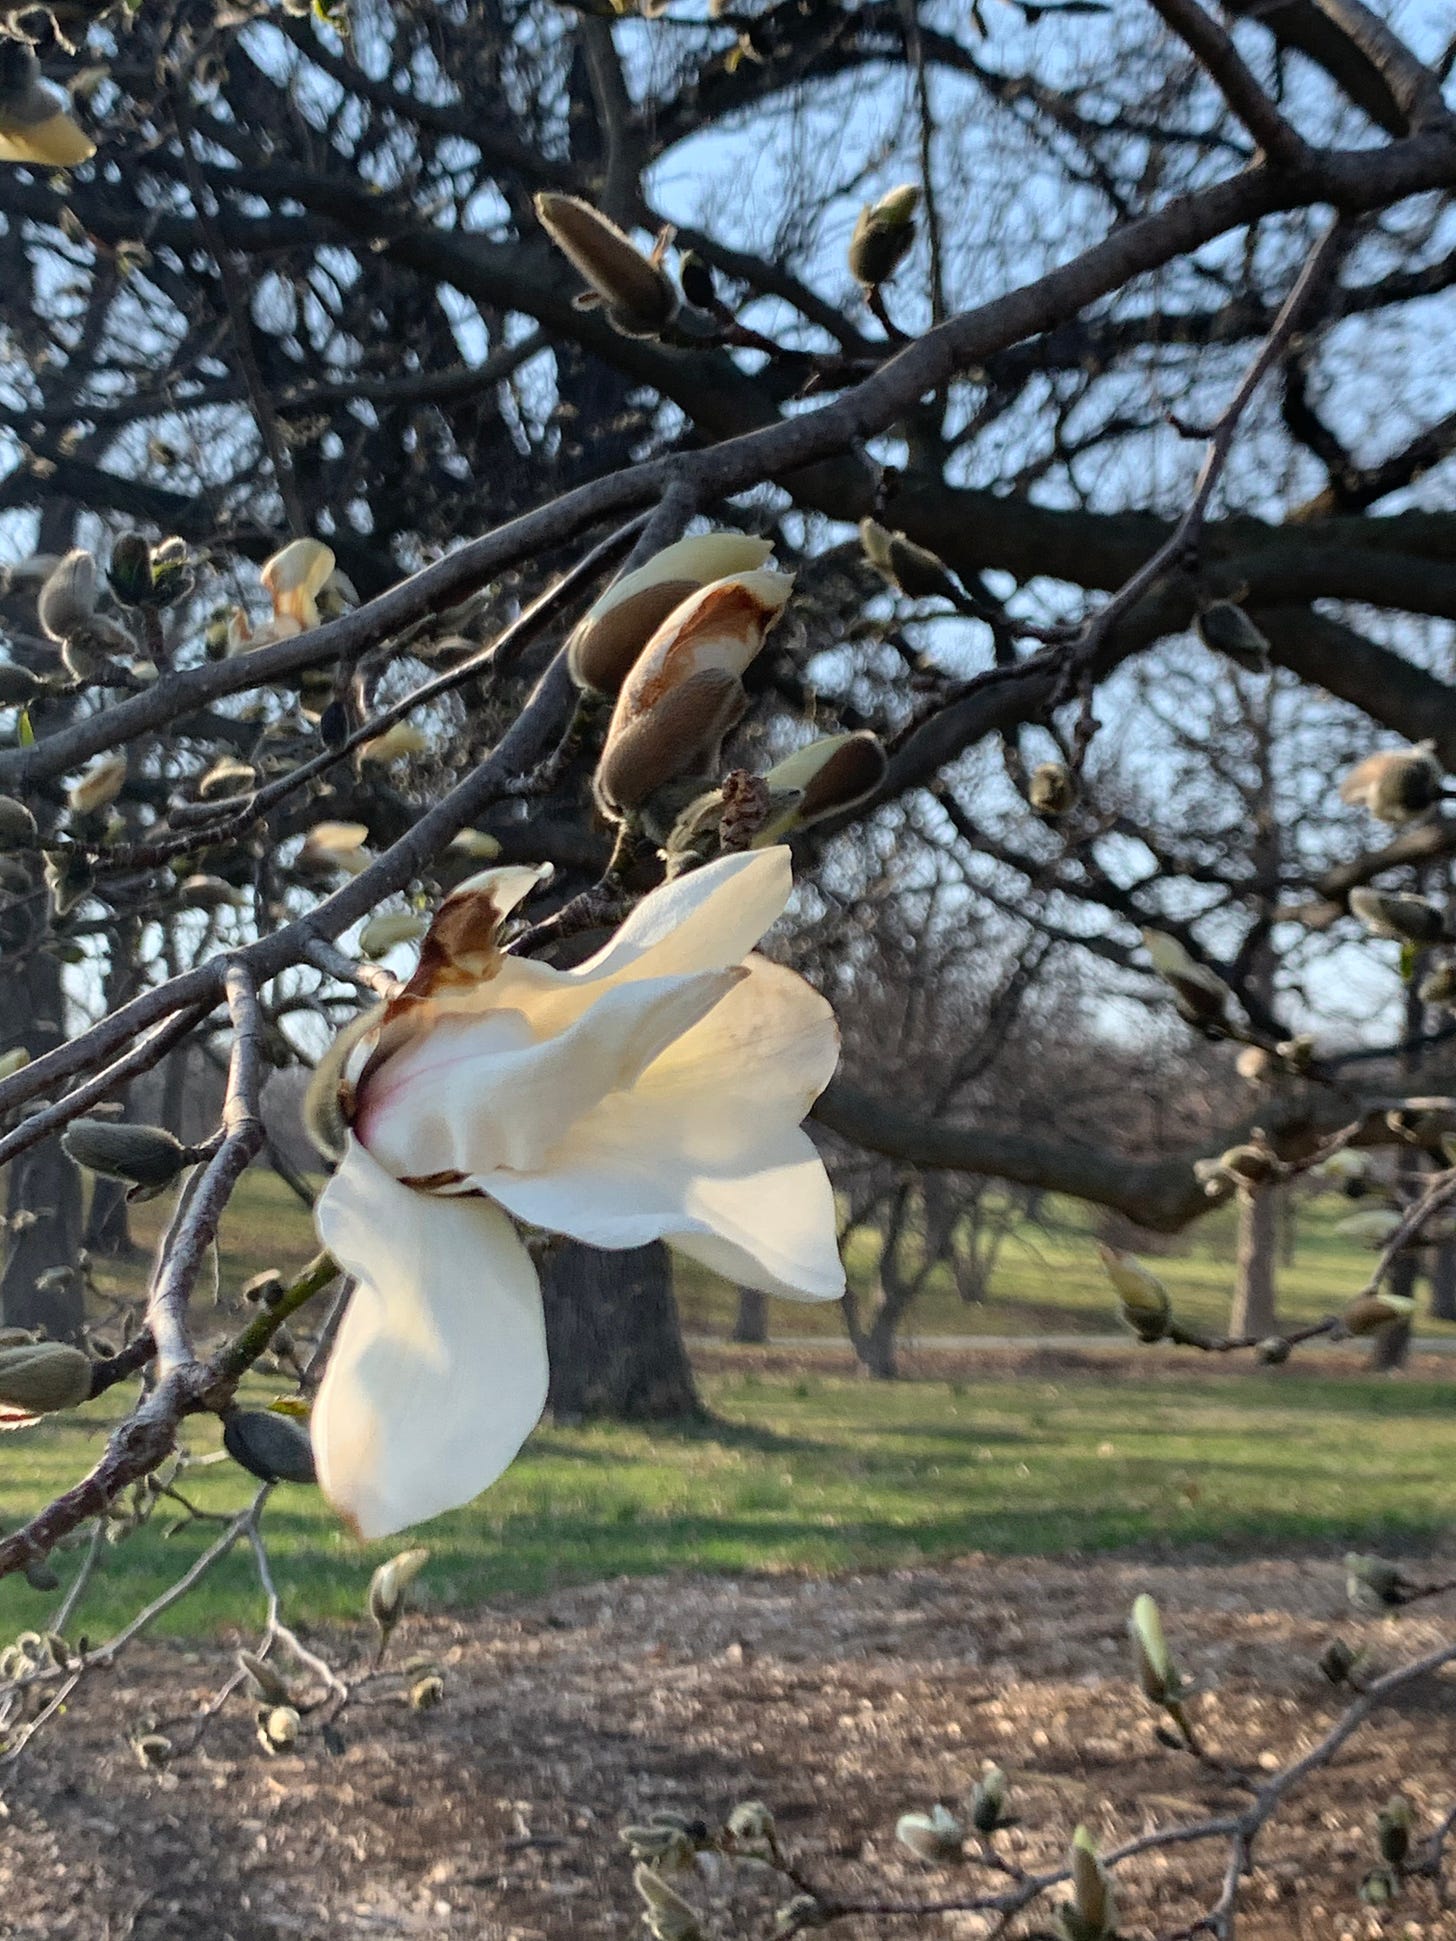 Petals just beginning to push out of a bud on a Magnolia tree